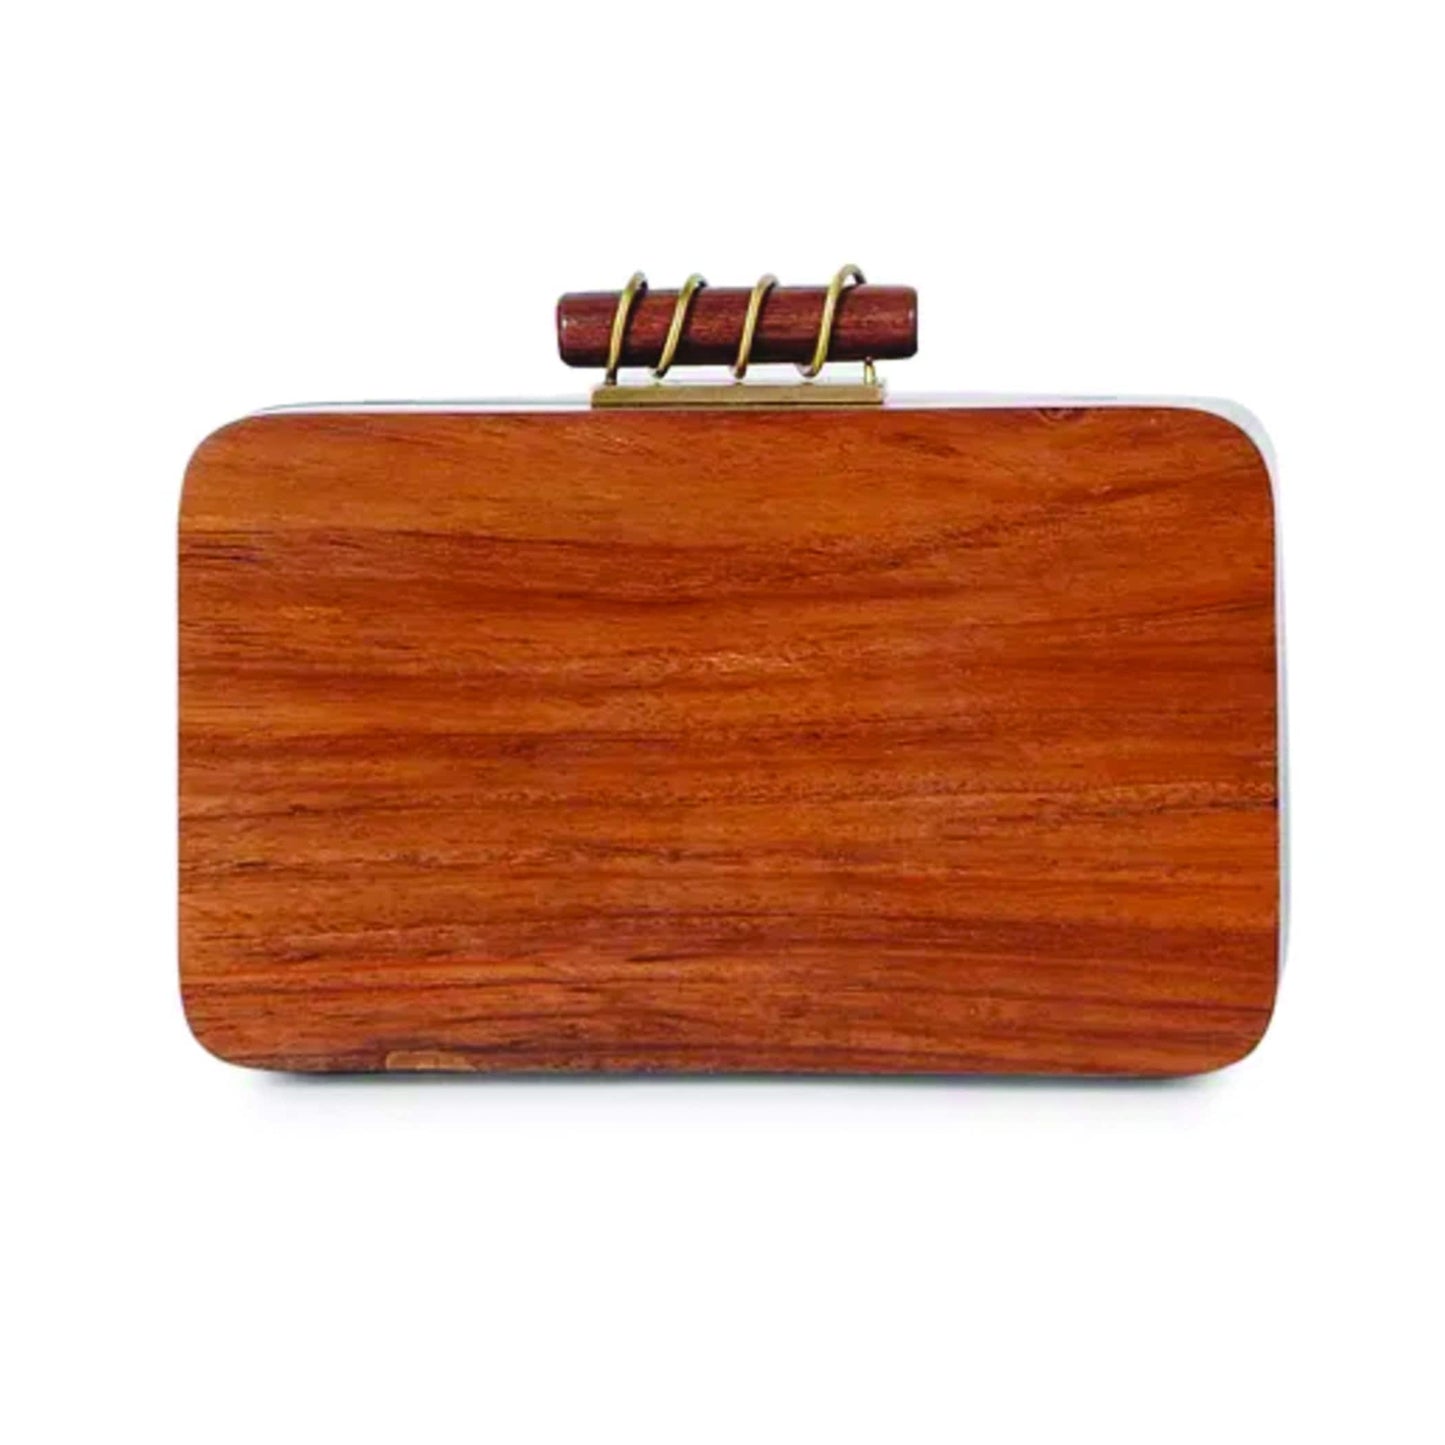 Rectangular Solid Brown Handcrafted Wooden Clutch Sling Bag